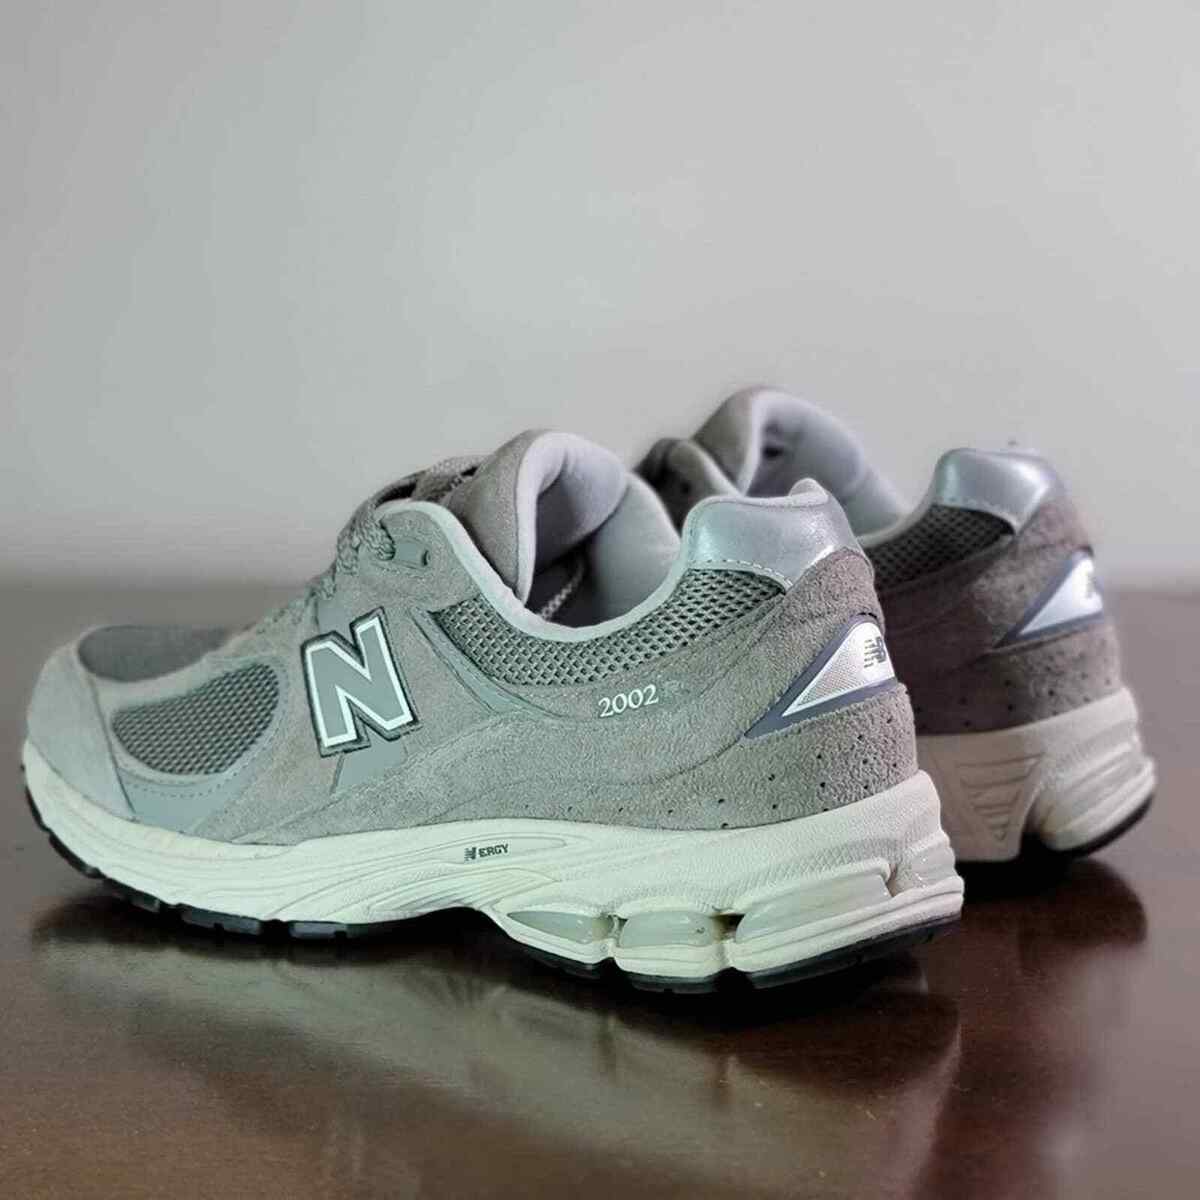 New Balance 2002R Marblehead Light Aluminum ML2002RC Suede Leather Men's 9.5